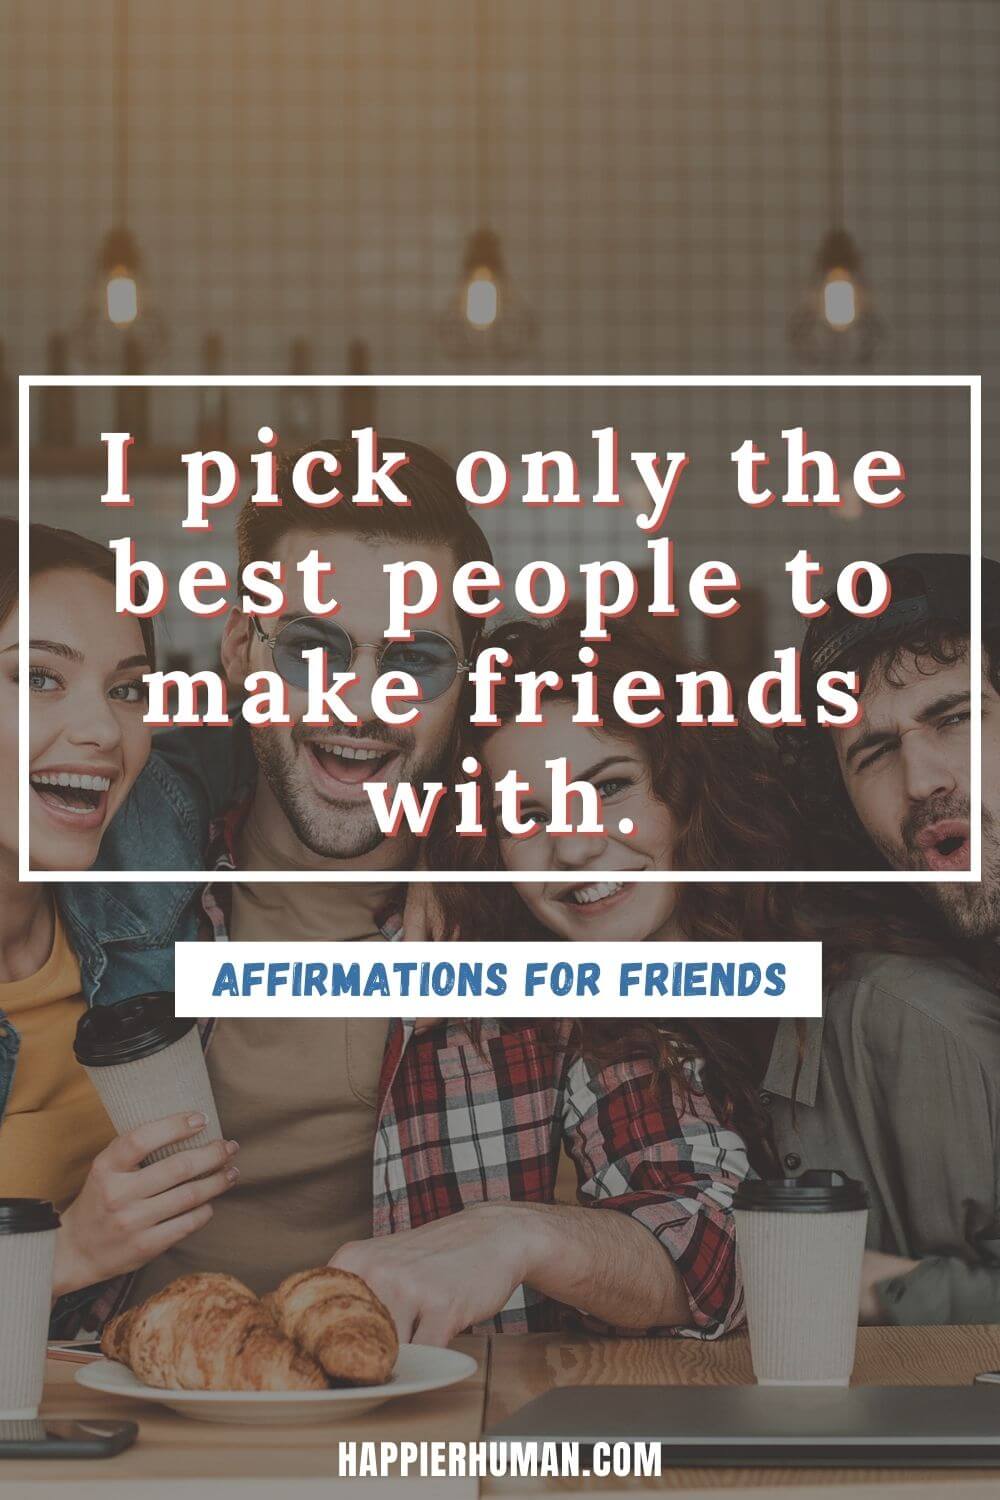 Affirmations for Friends - I pick only the best people to make friends with. | encouraging affirmations for others | positive affirmations to share with others | daily affirmations for friends